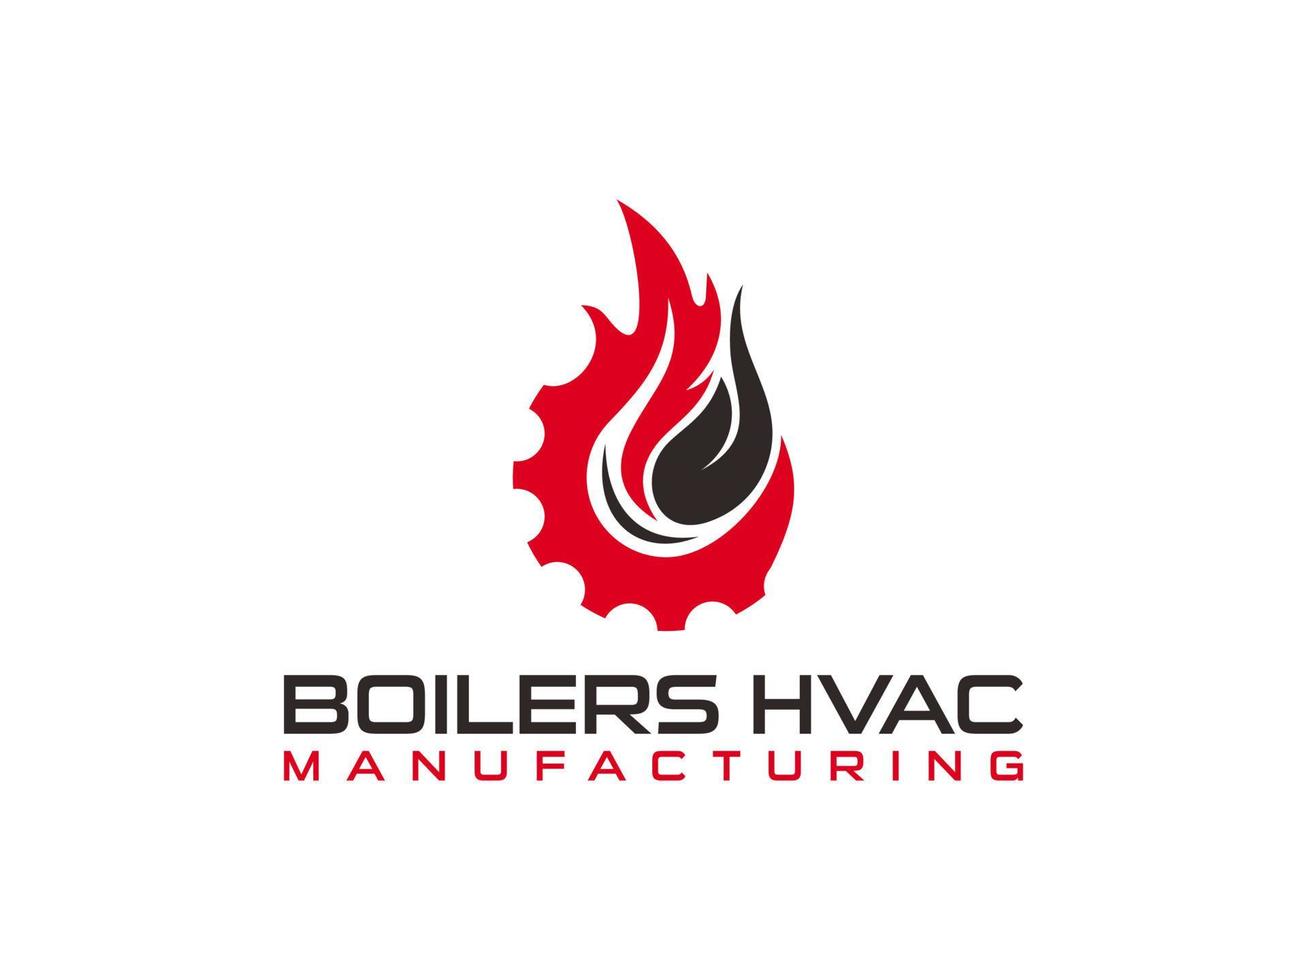 Boilers hvac business logo for appeal to high end residential customers and commercial customers that shows the customer elite vector